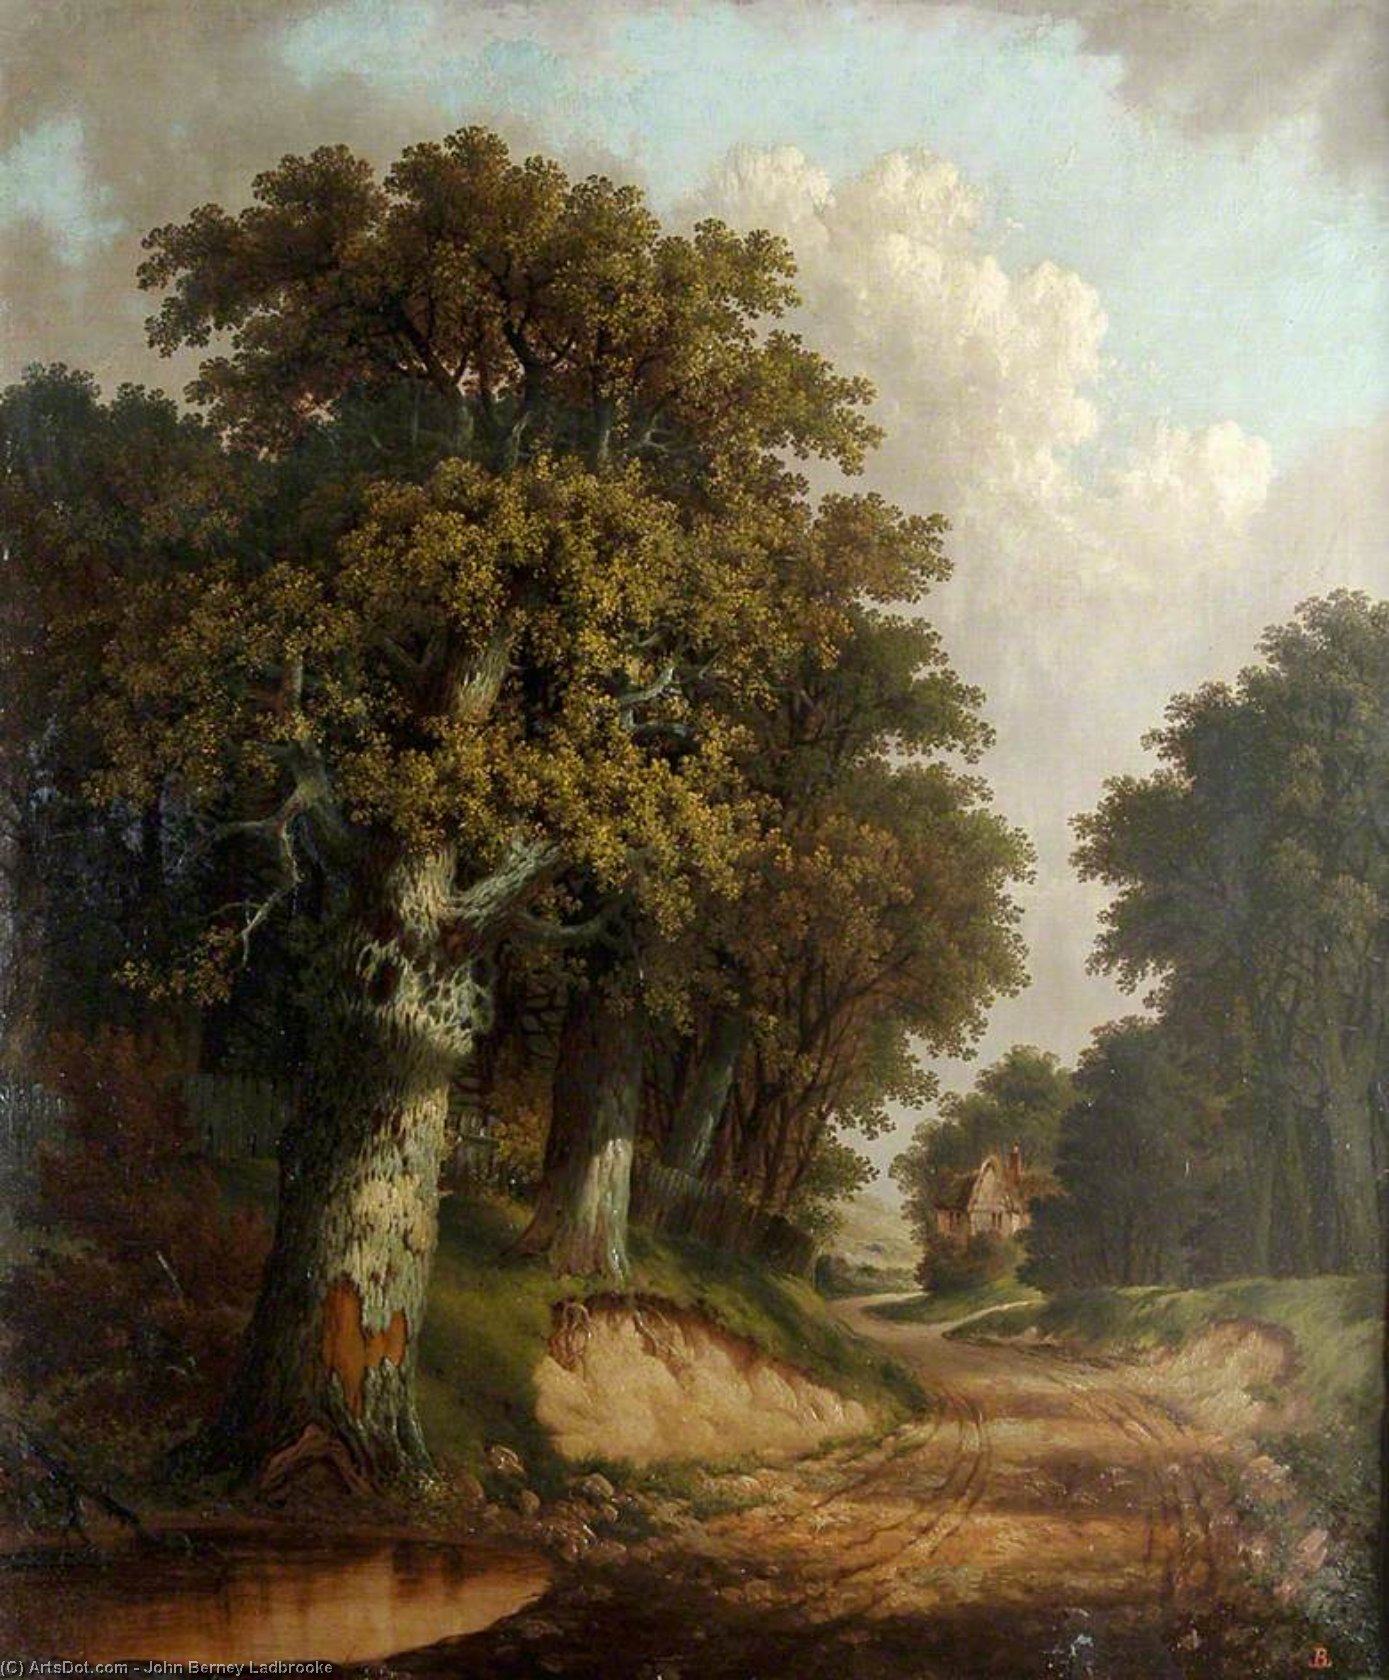 Buy Museum Art Reproductions Landscape With Trees, Cottage, Winding Lane And Pond by John Berney Ladbrooke (1803-1879, United Kingdom) | ArtsDot.com